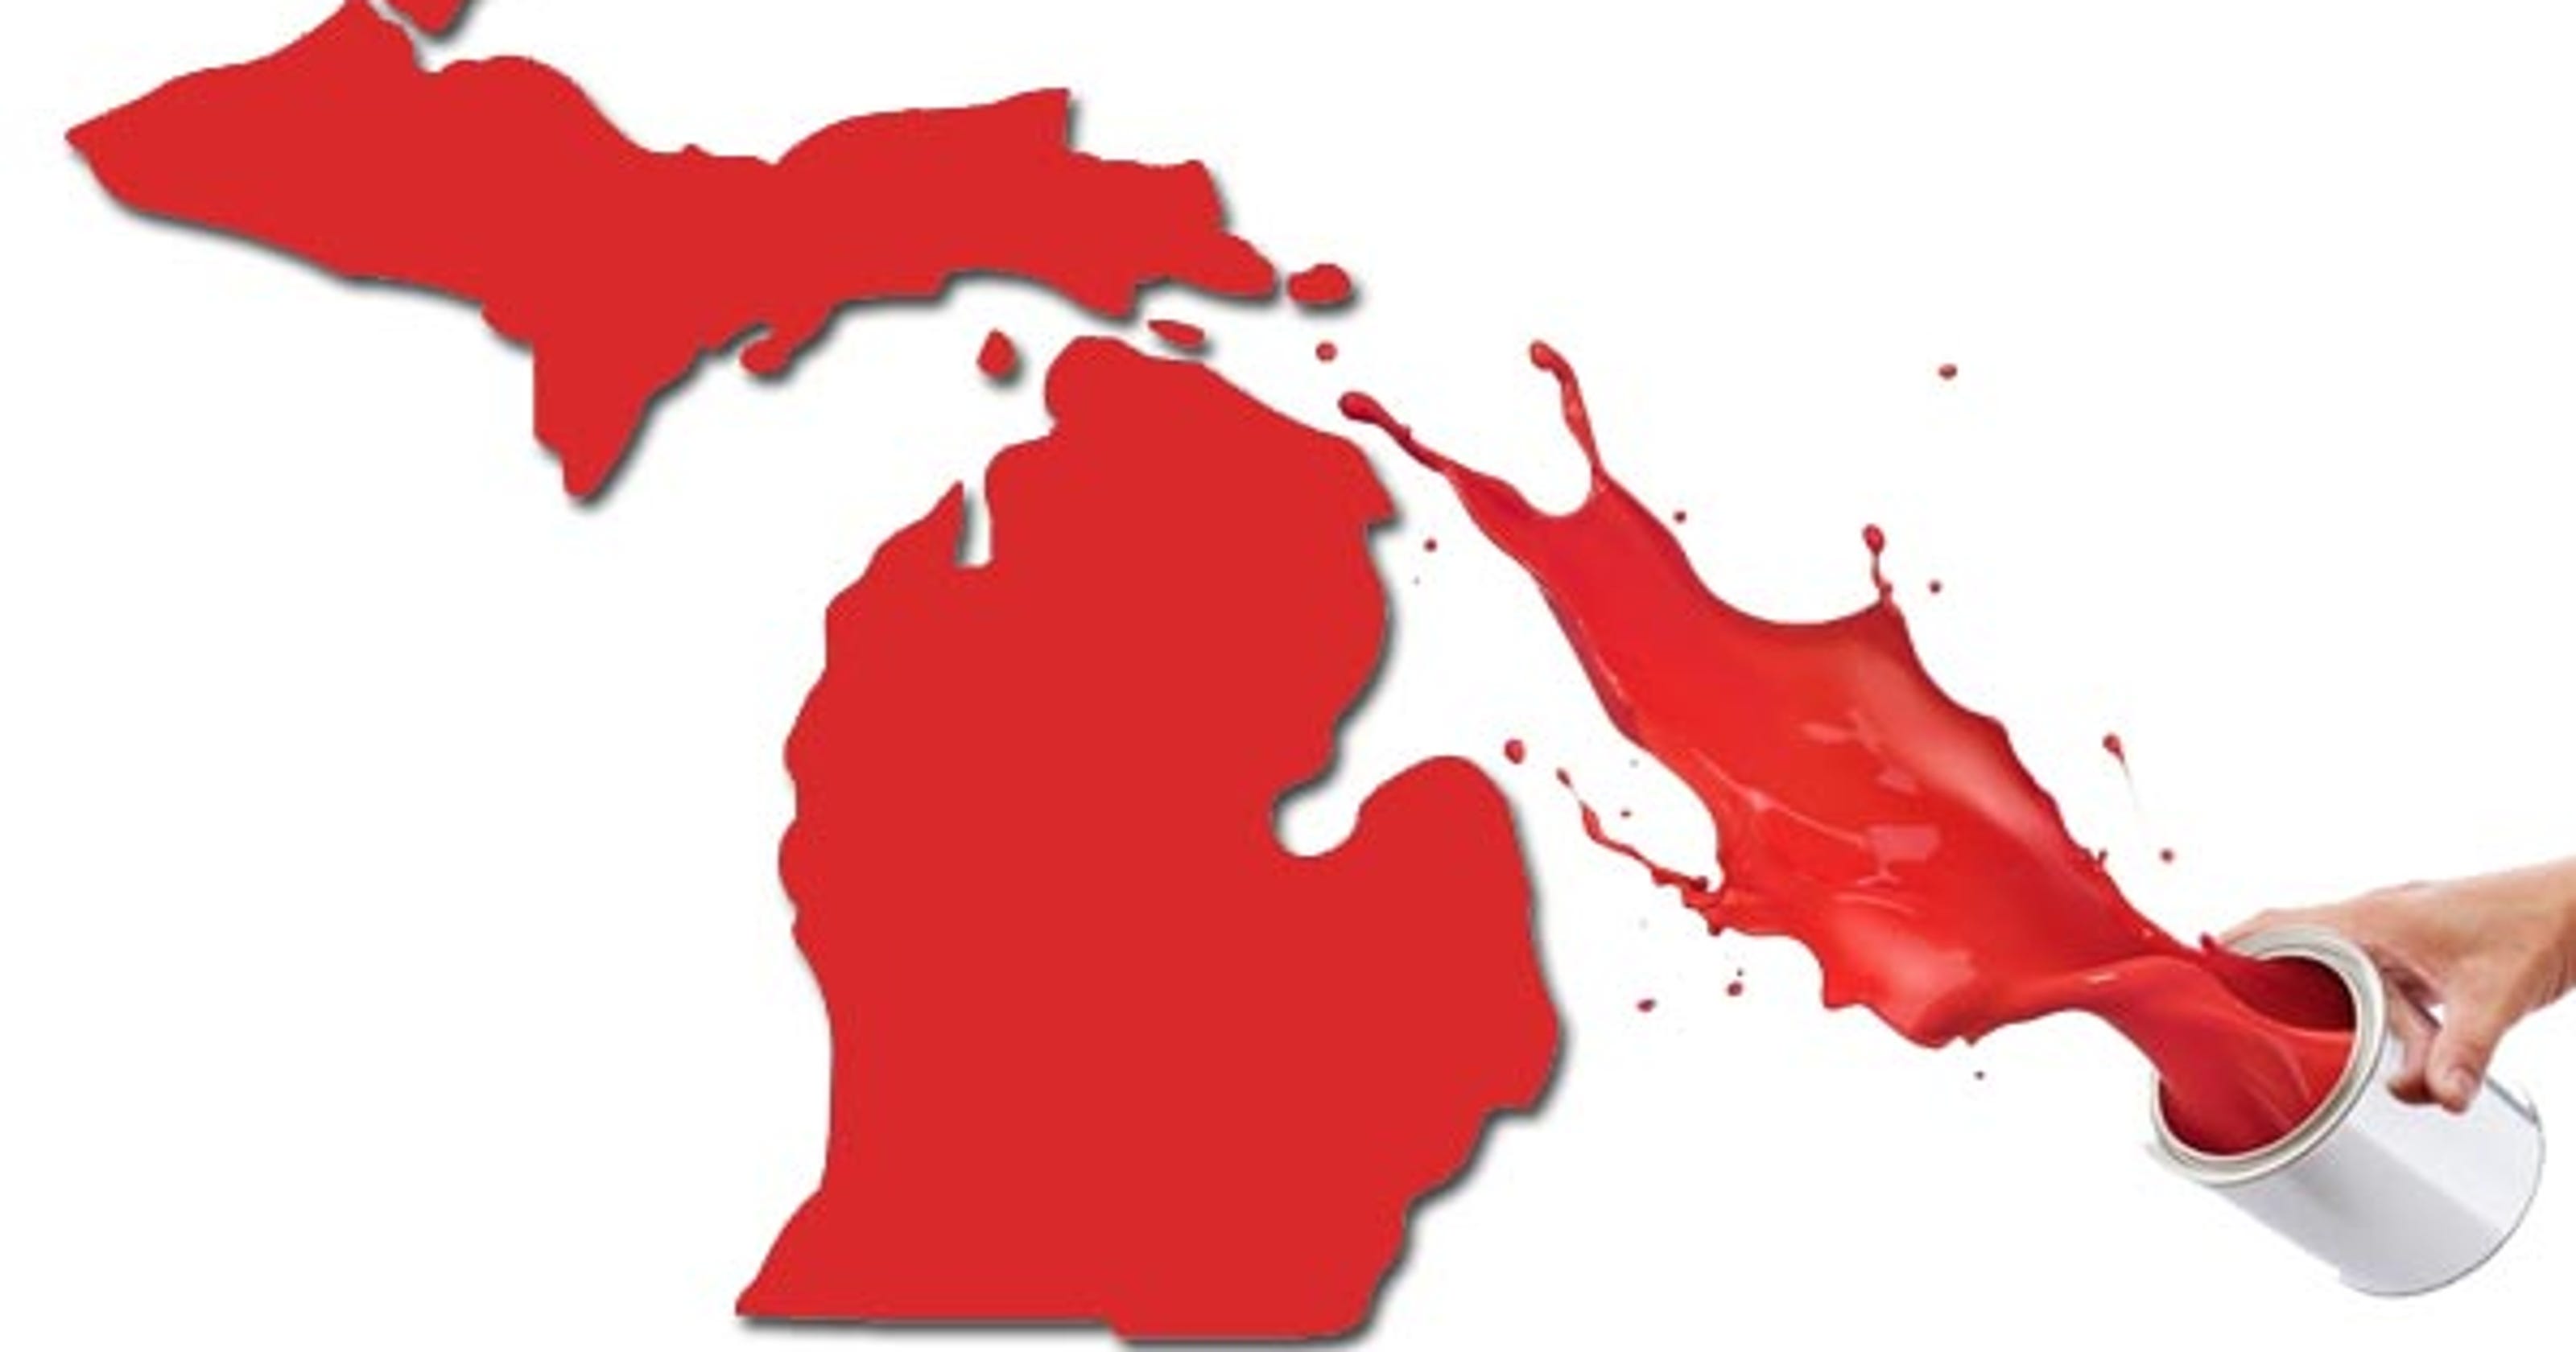 Is Michigan now officially a red state?